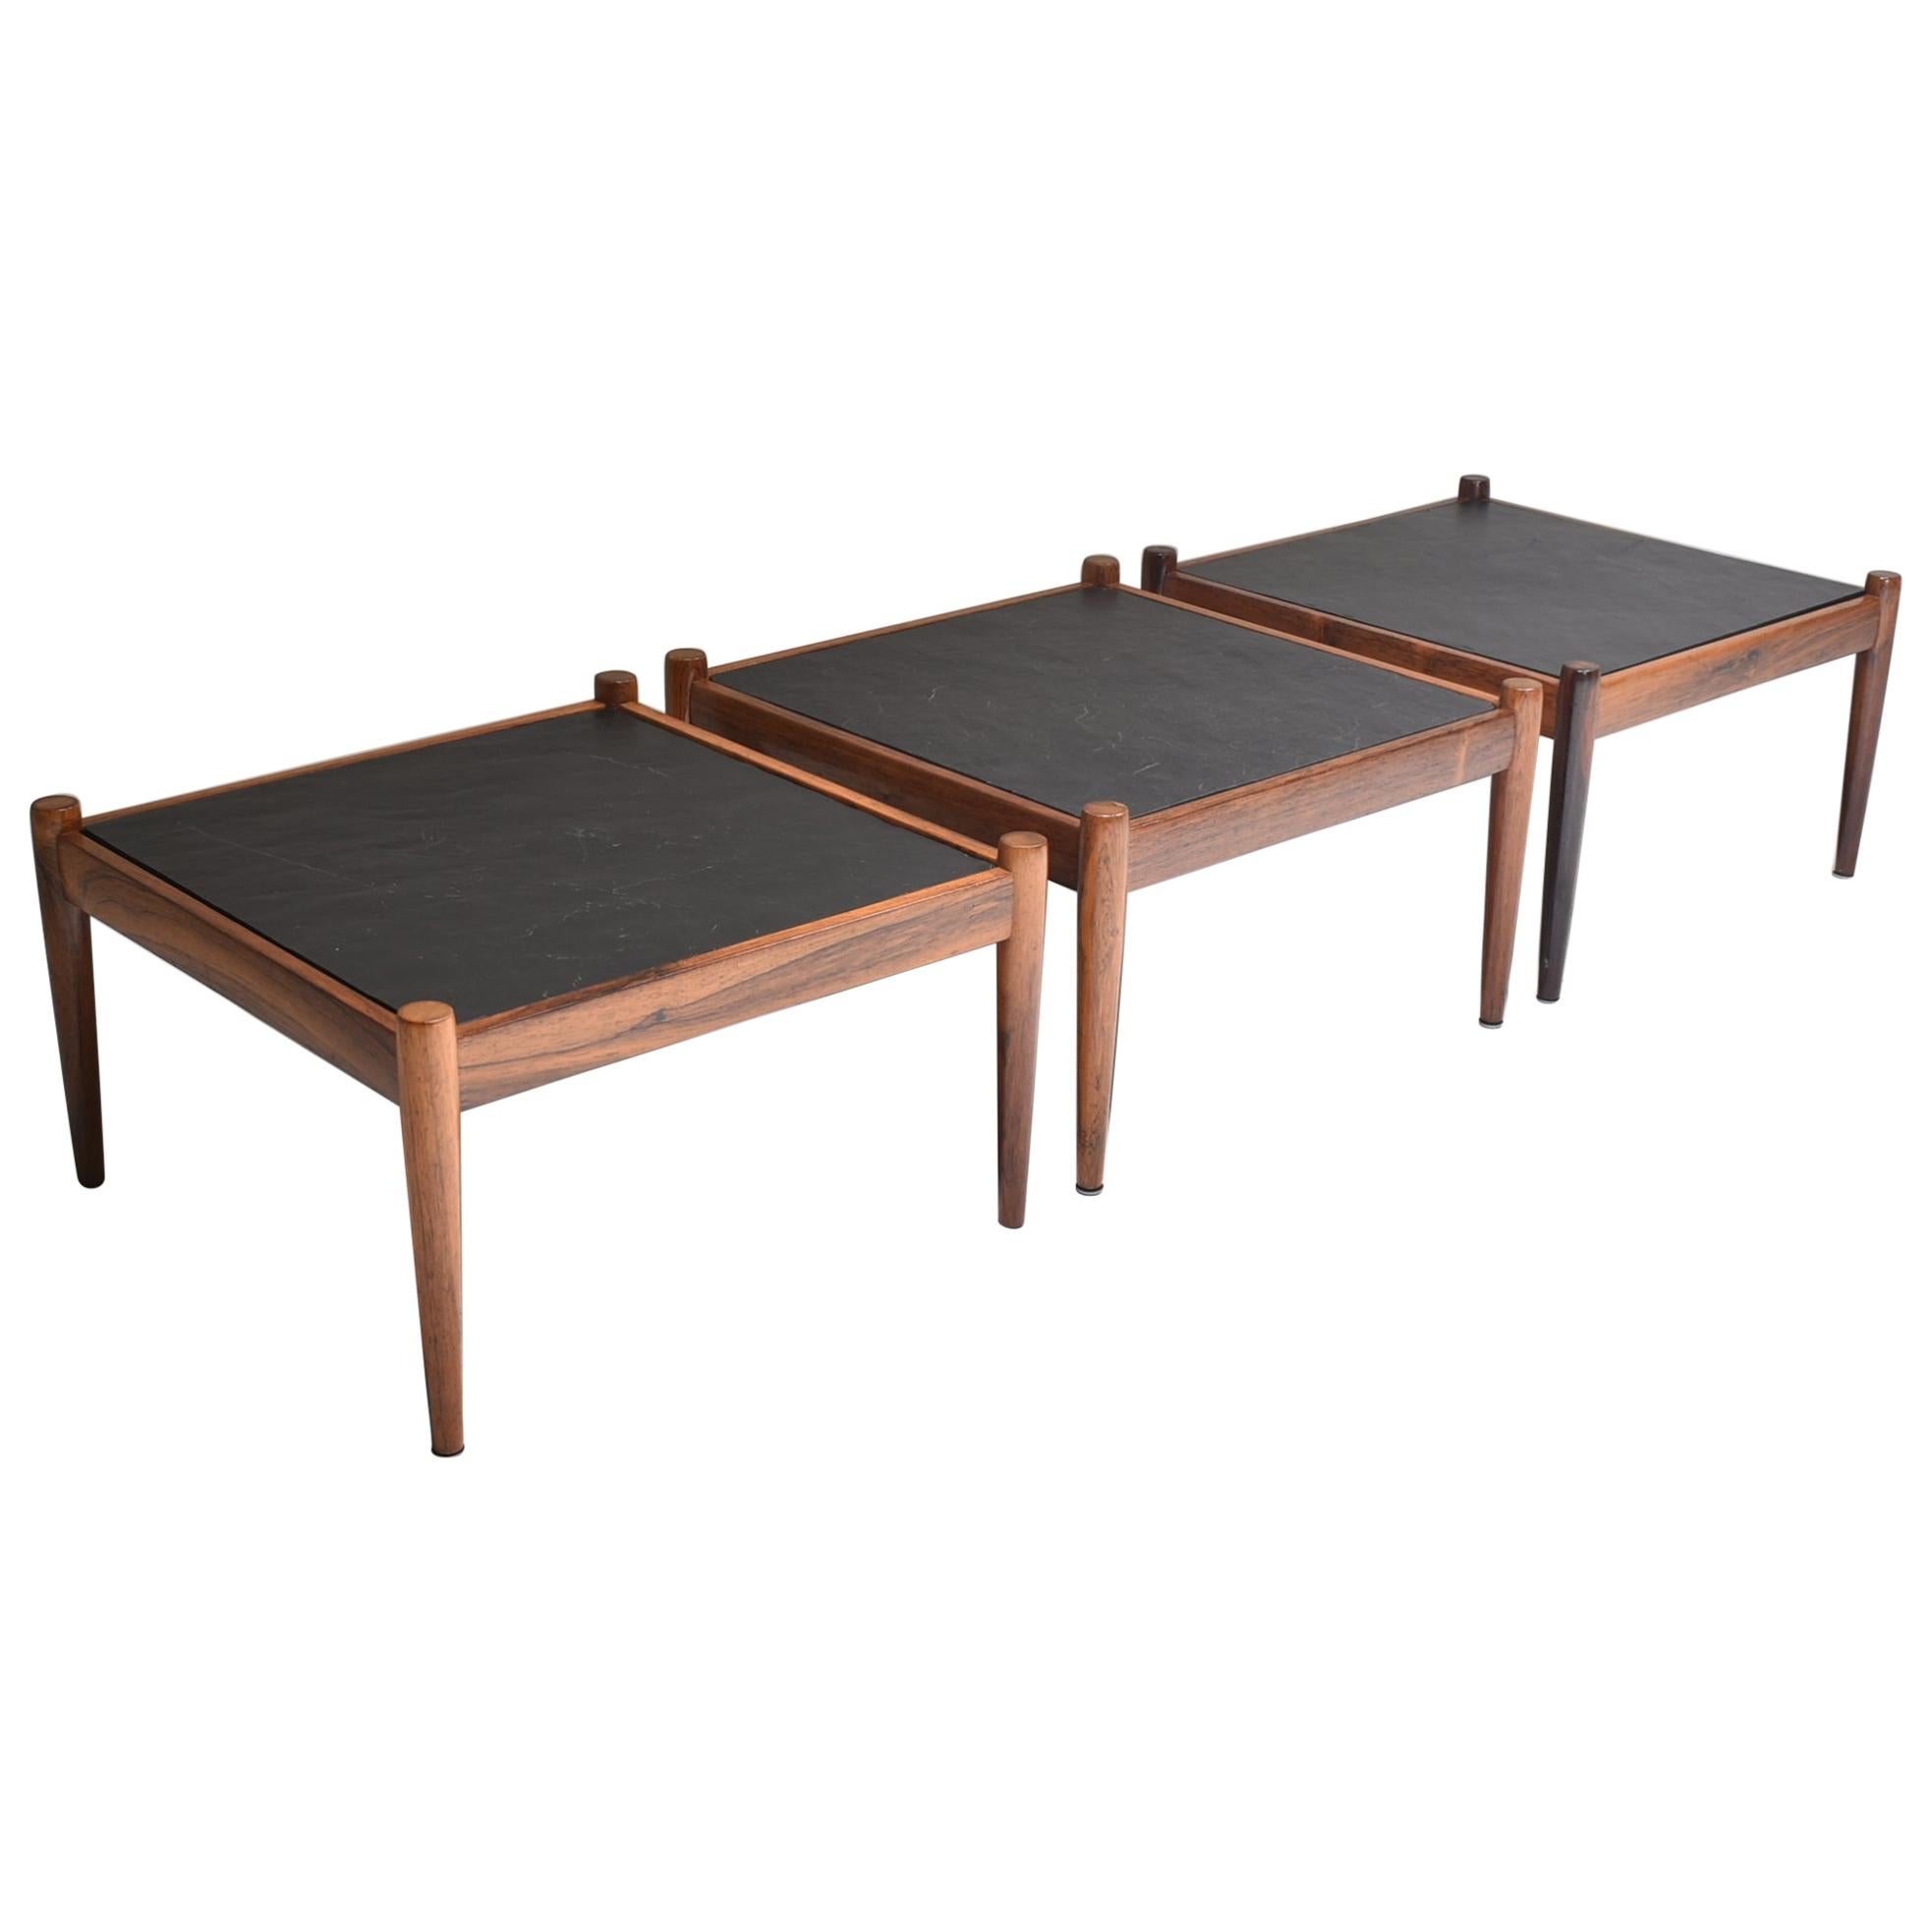 Set of Three Slate and Rosewood Coffee Tables "Universe" by Kai Kristiansen 1960